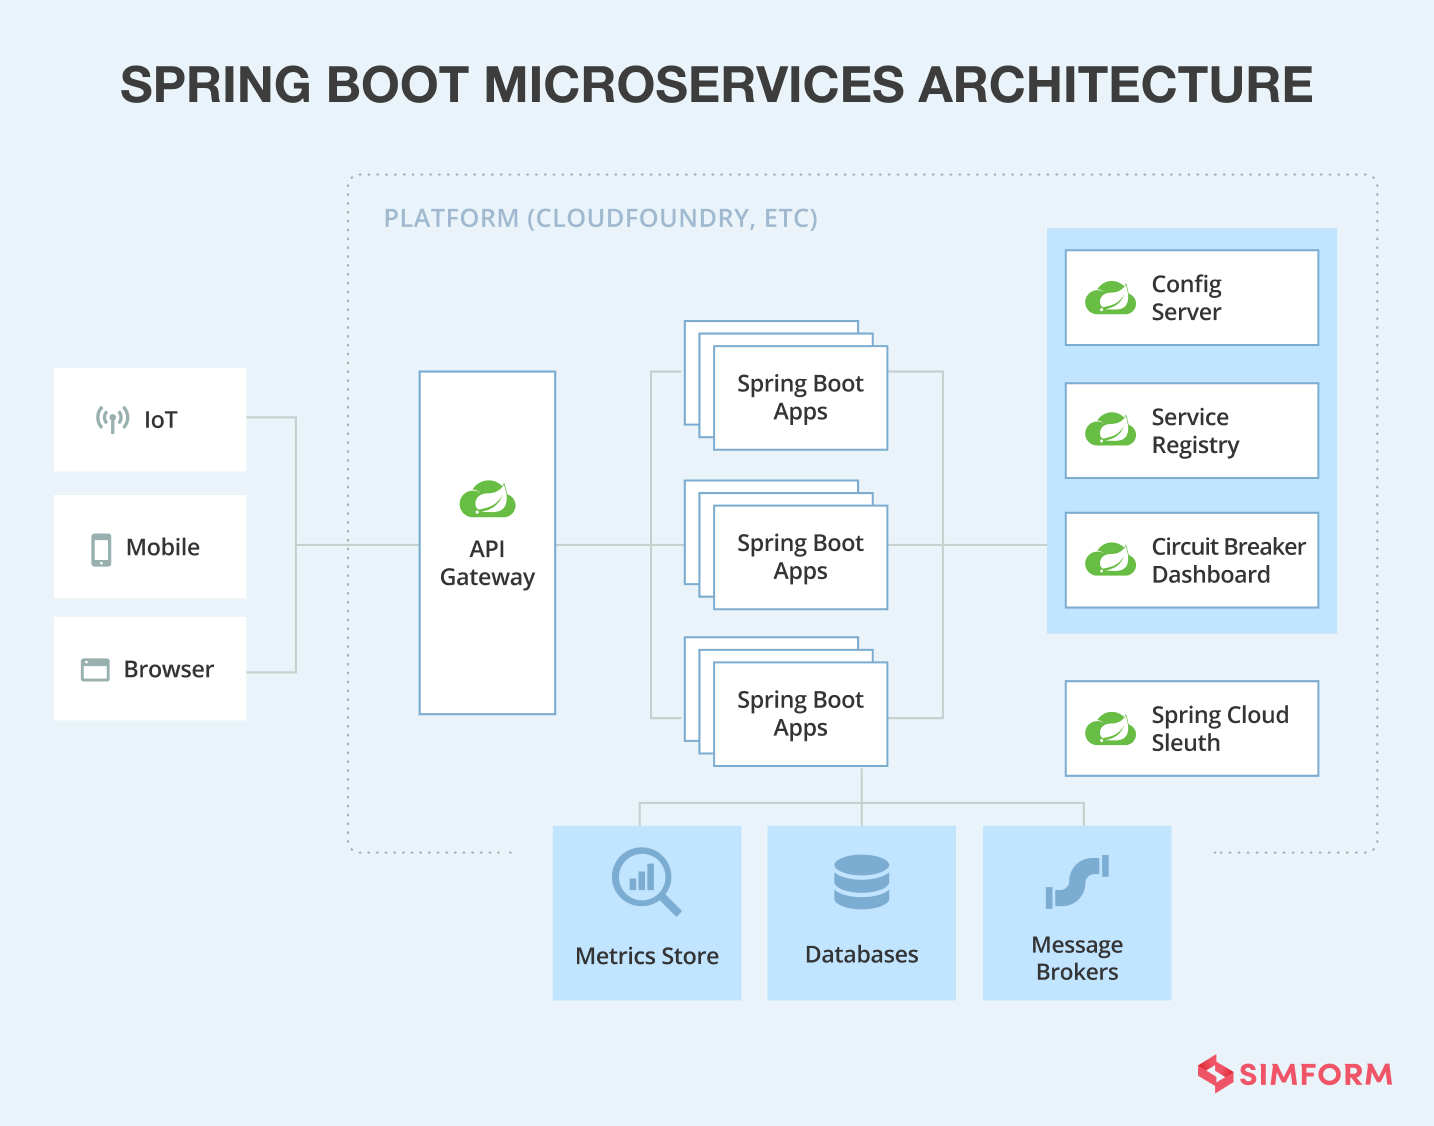 Spring Boot Microservices framework architecture